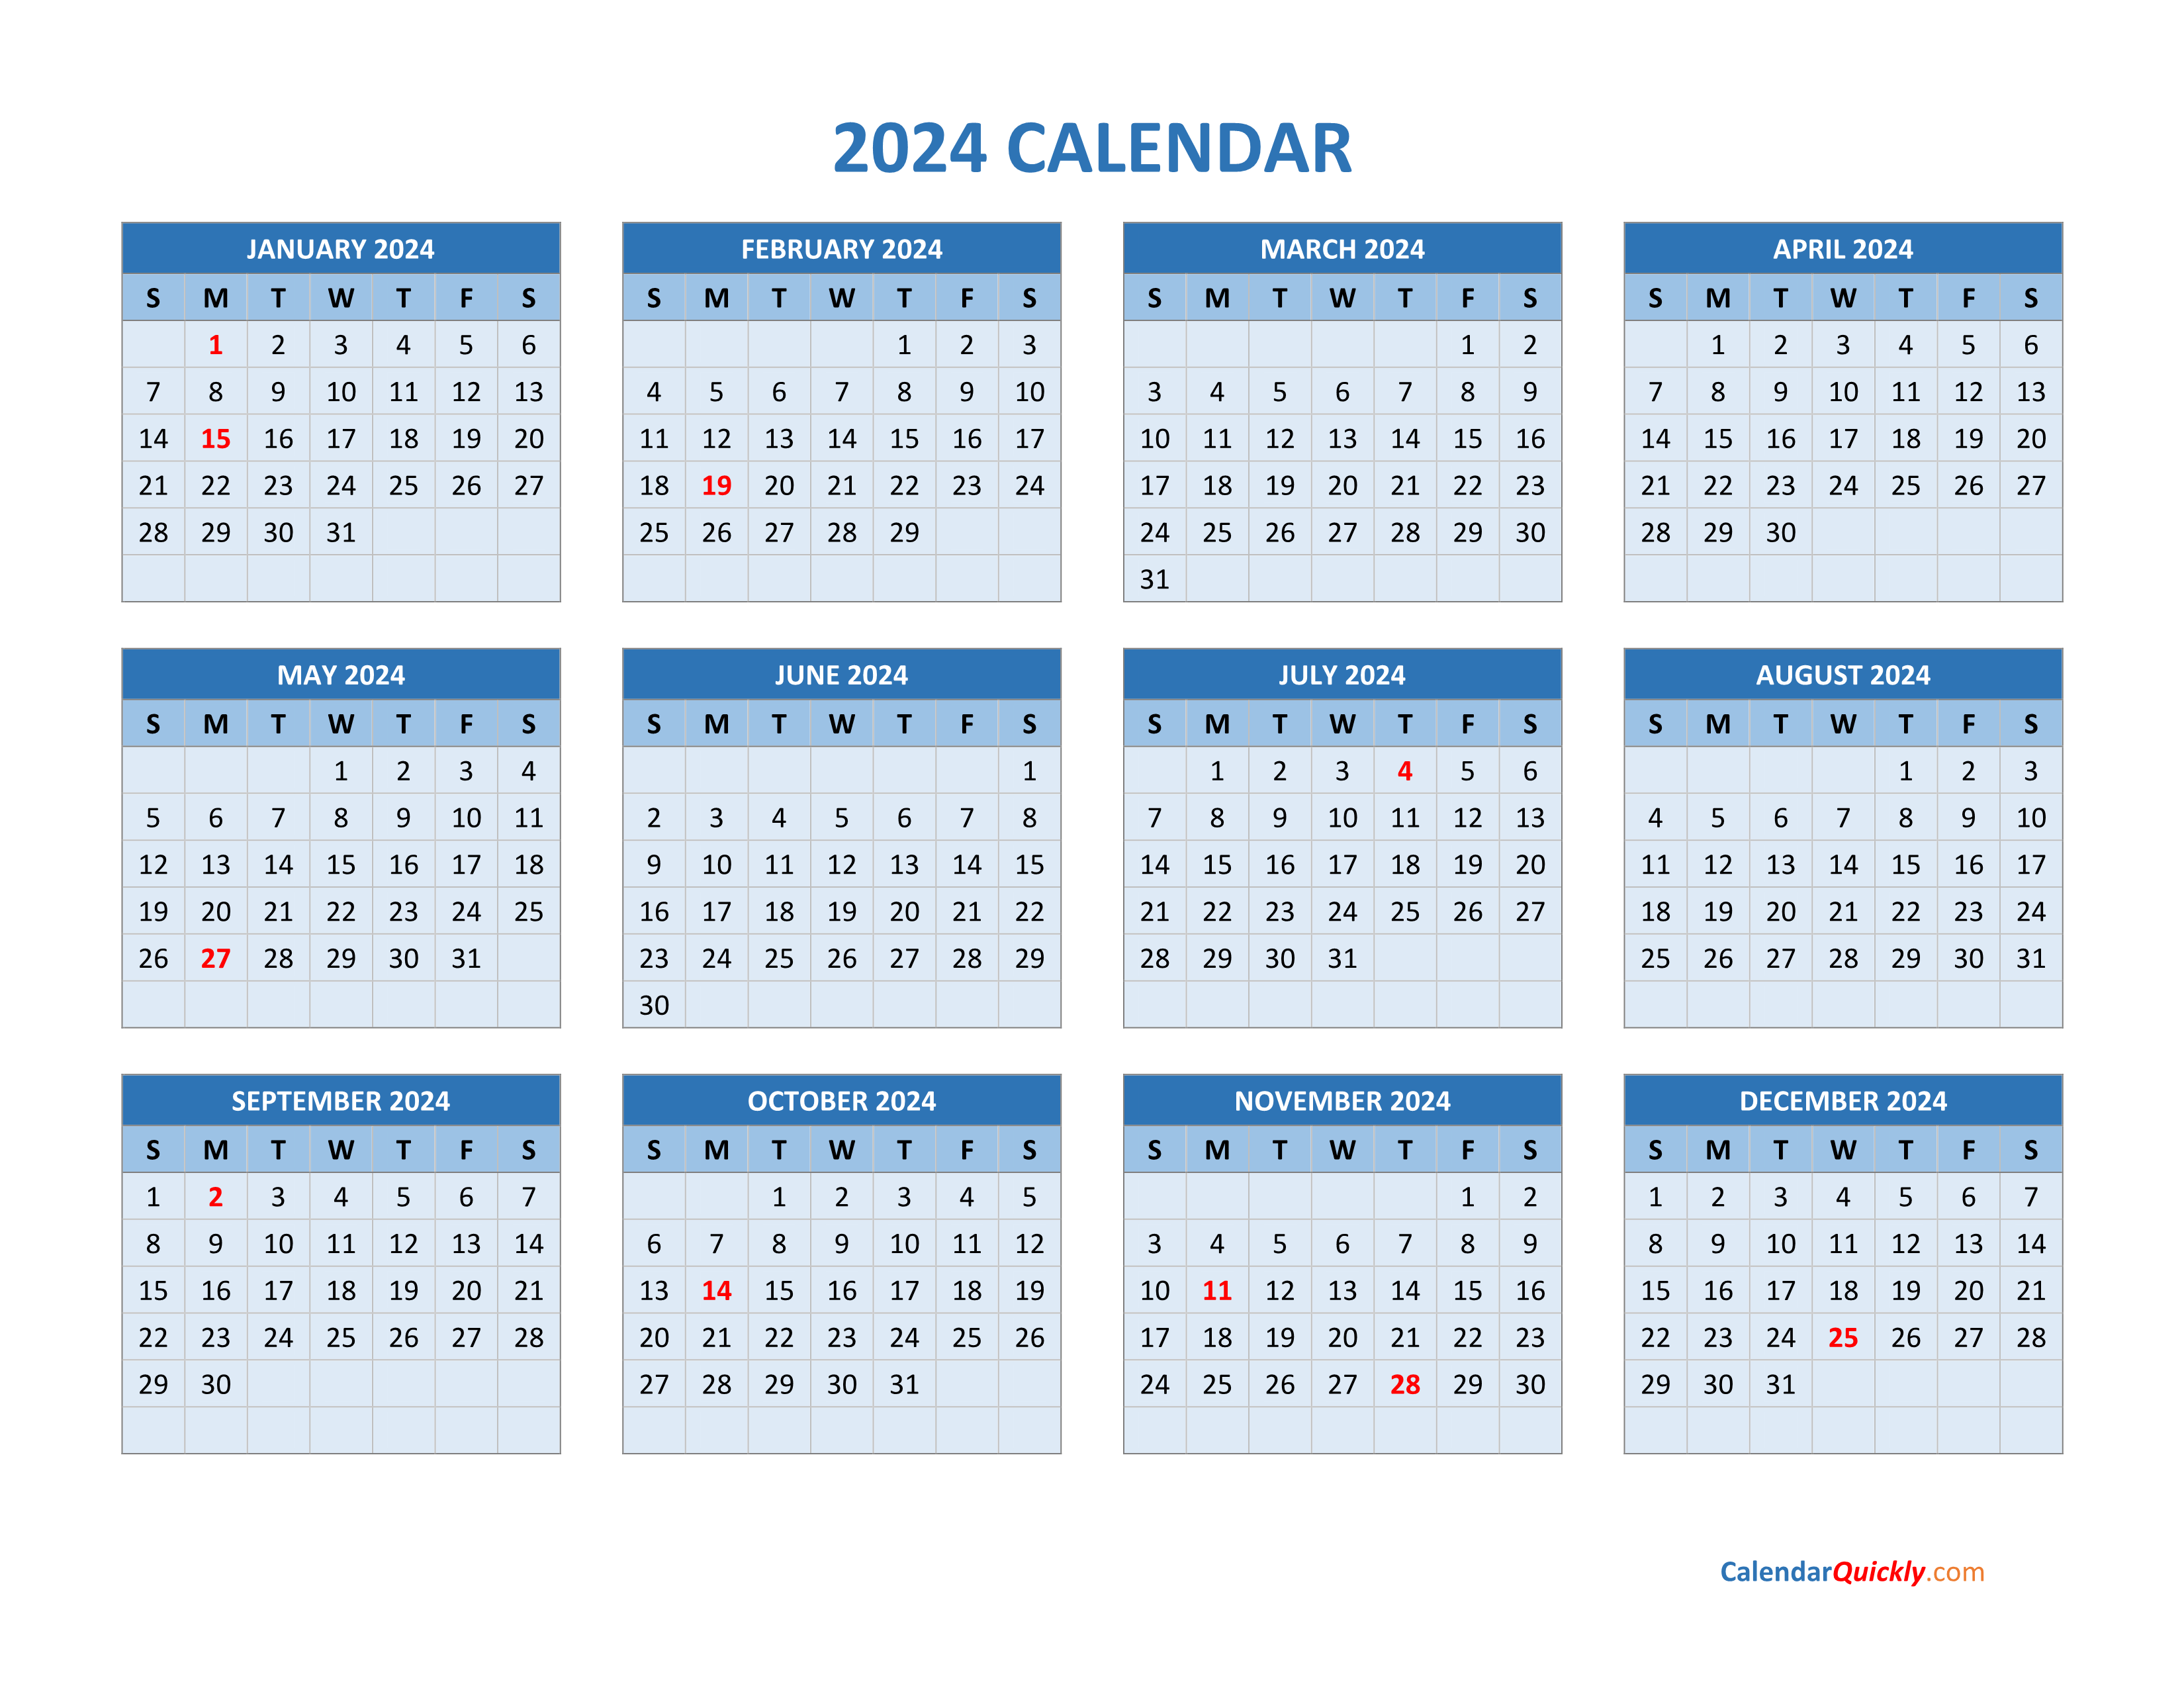 2024 Calendar Is The Same As What Year Now Tilly Ginnifer